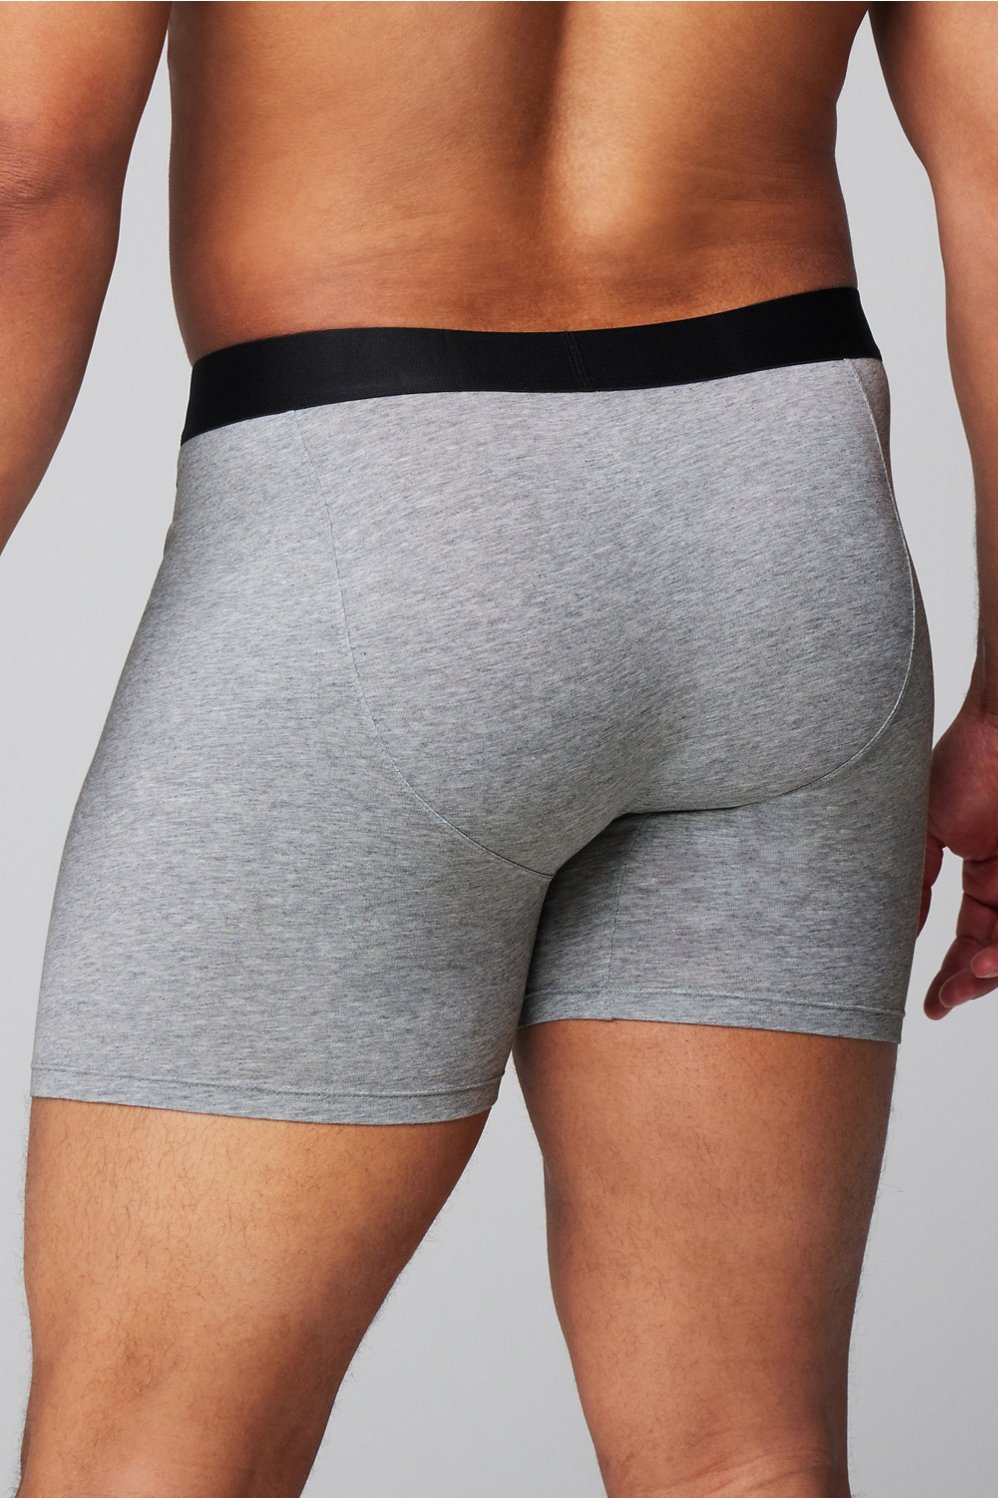 EVB Sport on X: Our EVB Boxer Briefs are designed to keep you